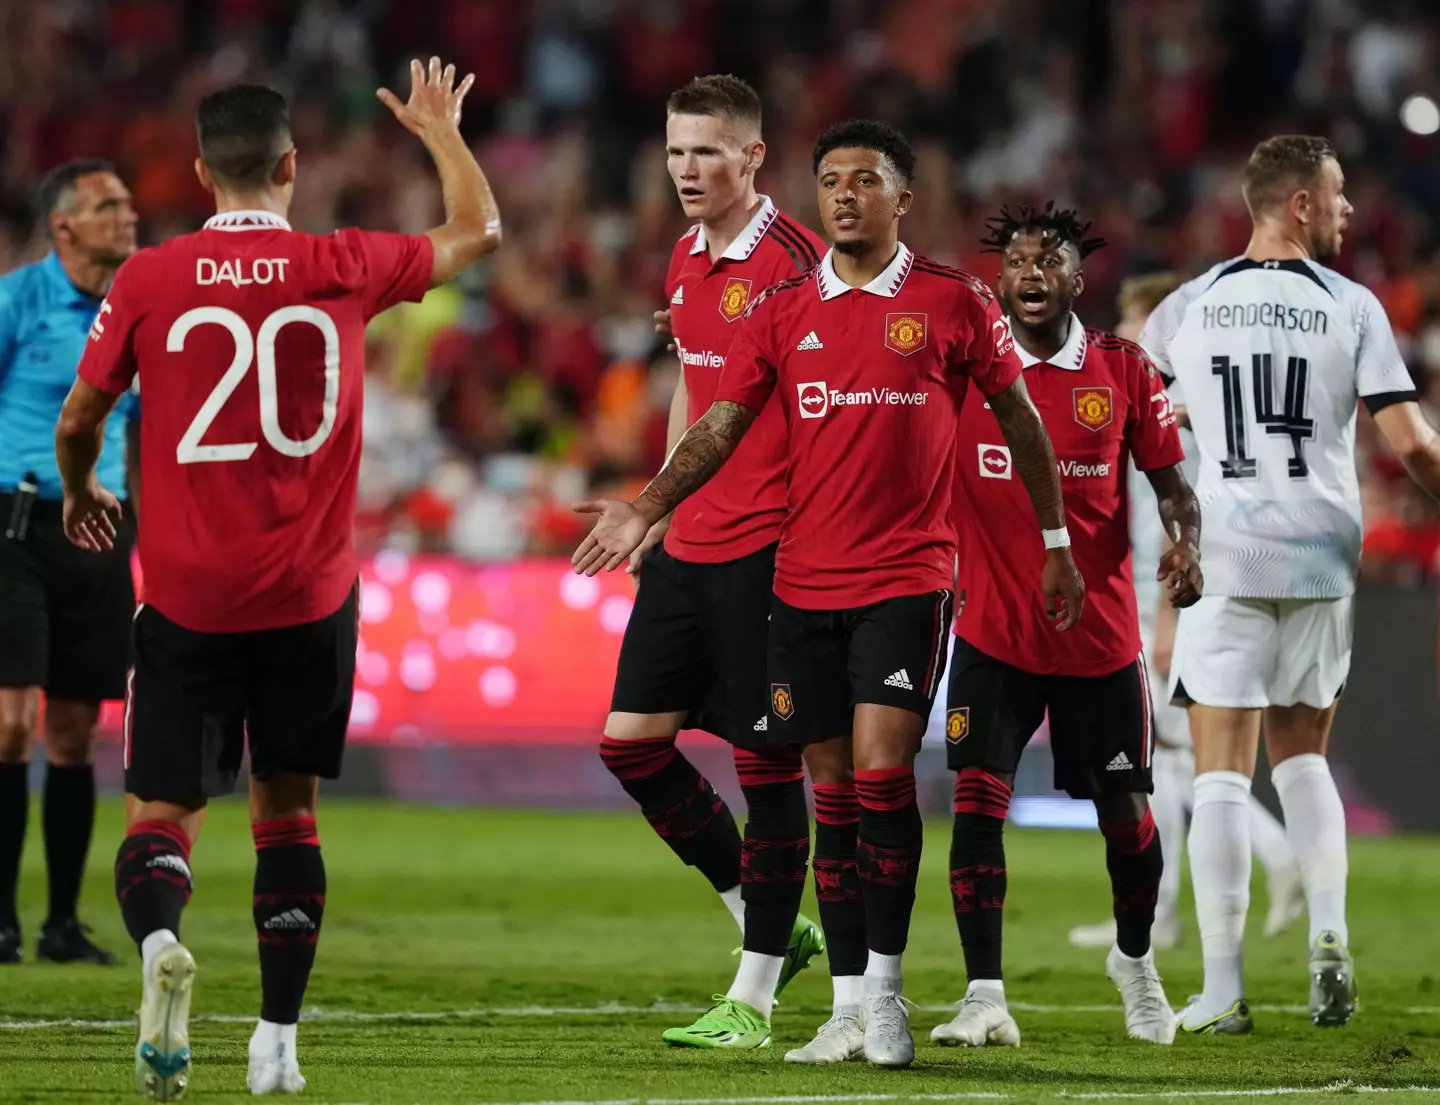 United also impressed against Liverpool. Image: Alamy